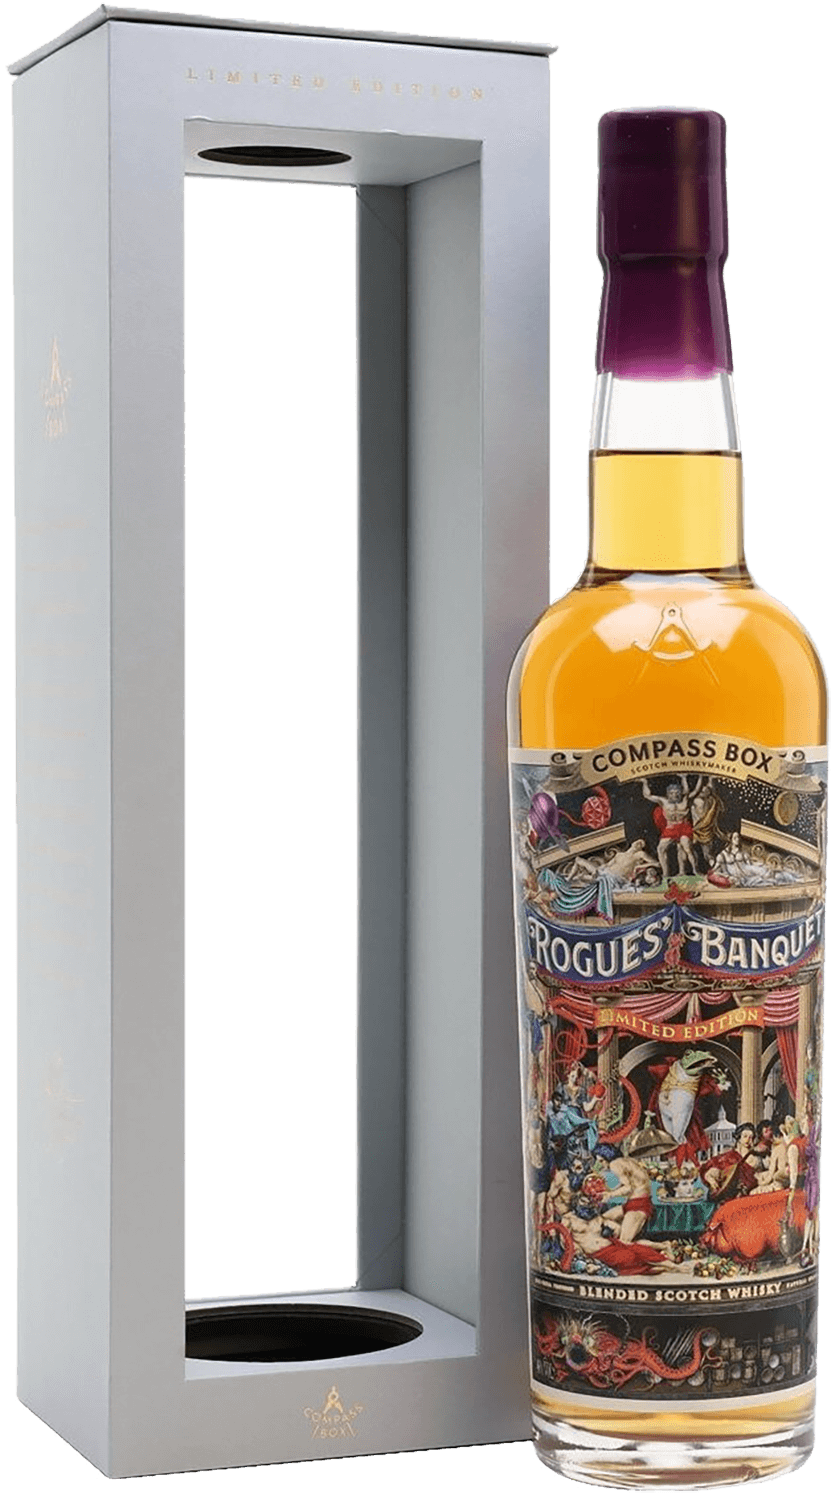 Compass Box Rogues' Banquet Blended Scotch Whisky (gift box) compass box menagerie blended malt scotch whisky gift box